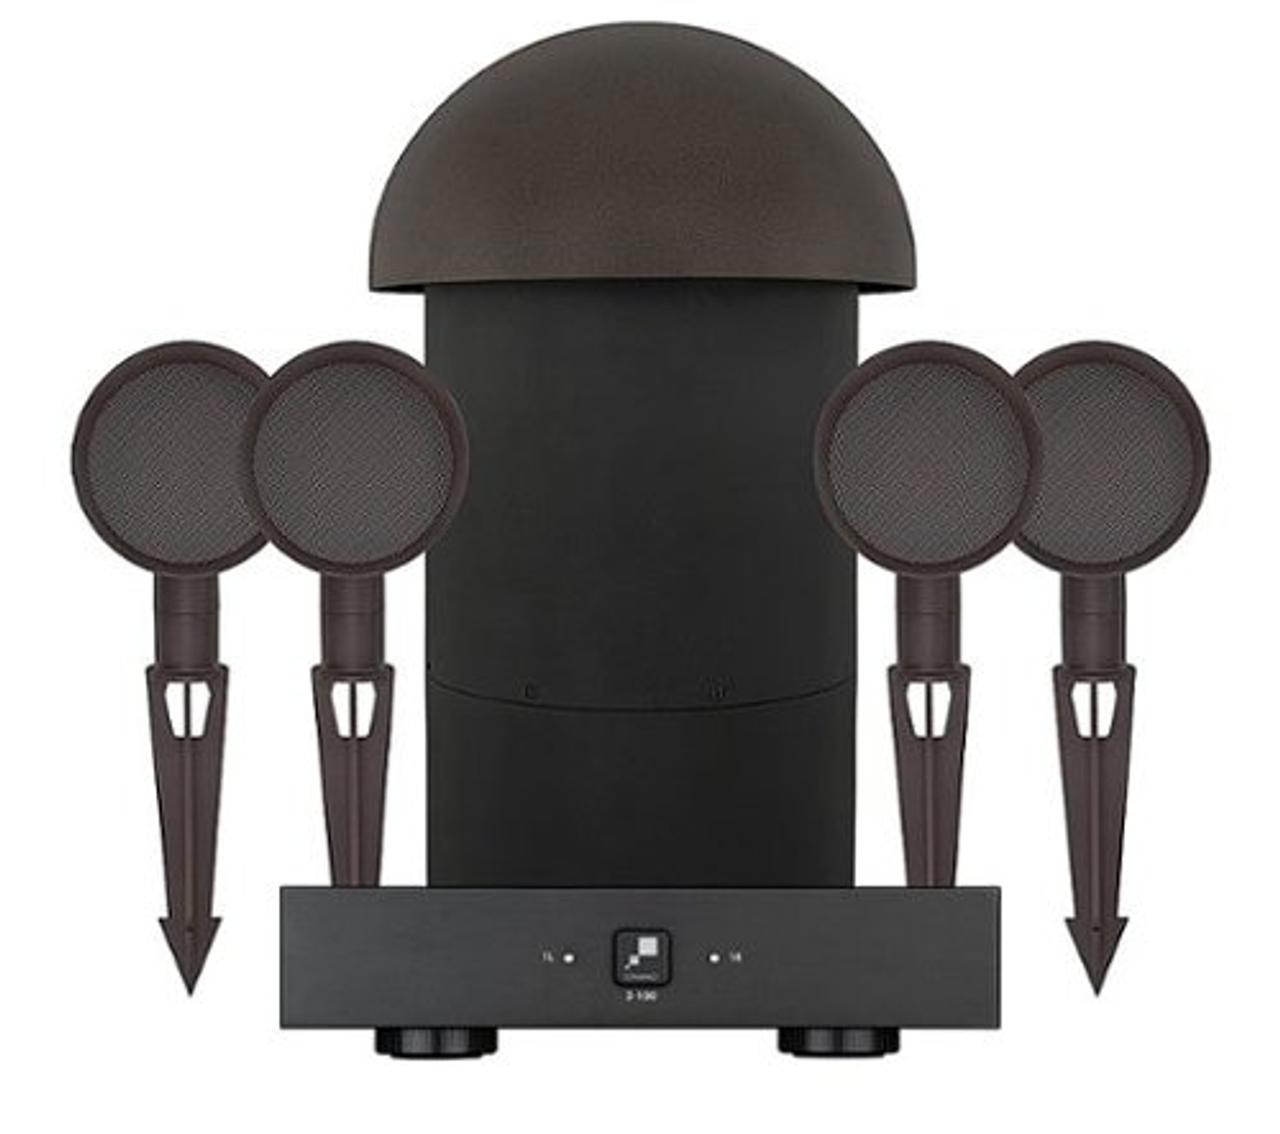 Sonance - PATIO4.1 W/ 2-100 AMP - Patio Series 4.1-Ch. Outdoor Speaker System with 2-Ch. Amplifier (Each) - Brown/Black